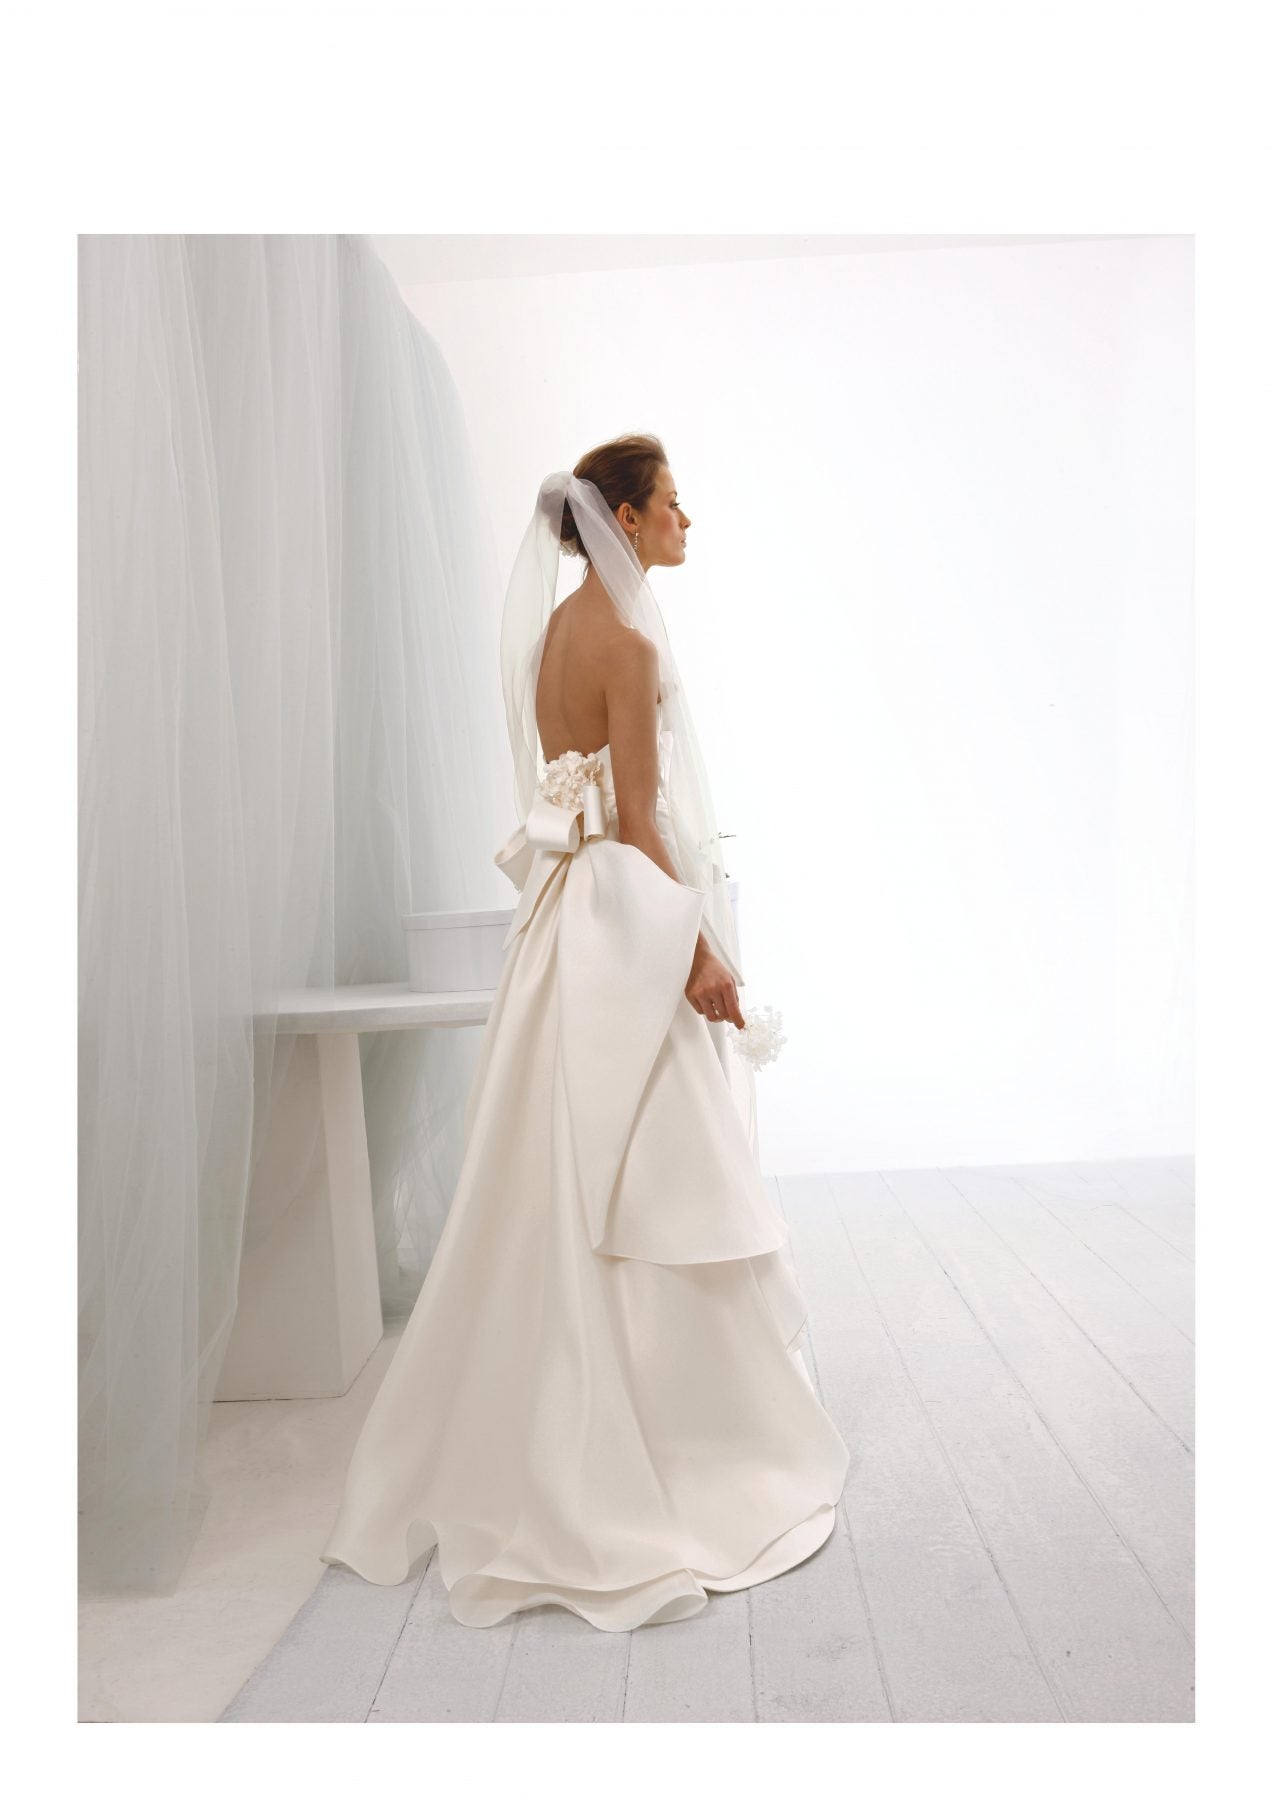 le-spose-di-gio-straight-neckline-fit-and-flare-wedding-dress-with-back-bow-33258971-1-1272x1800.jpg